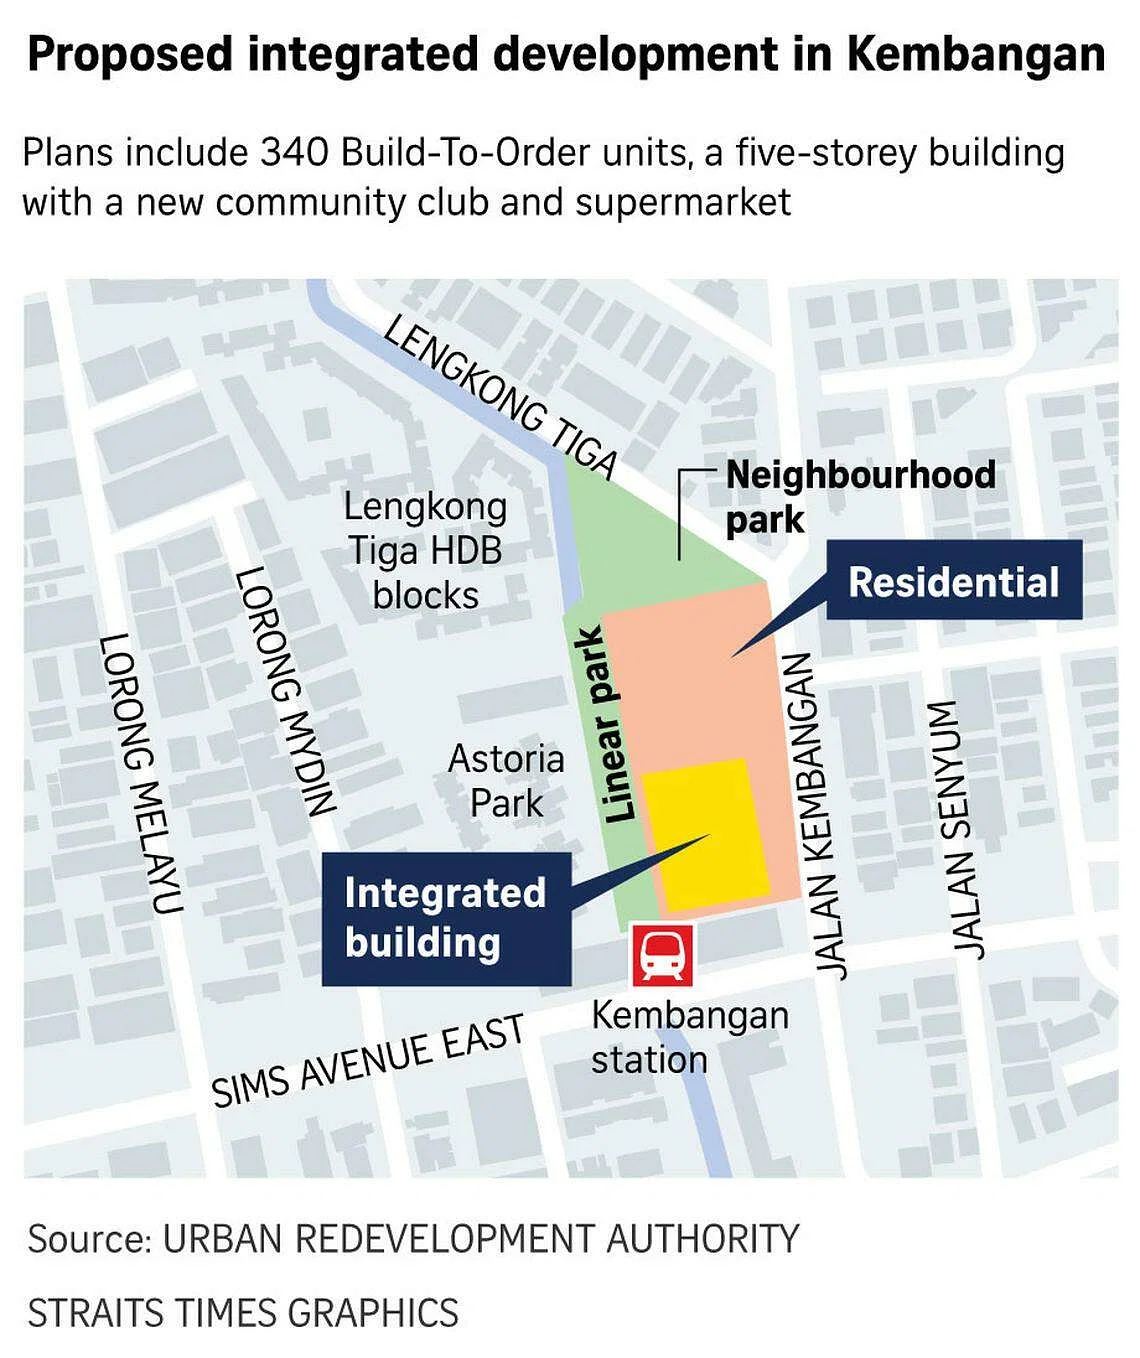 Proposed-integrated-development-in-Kembangan. Source: The Straits Times